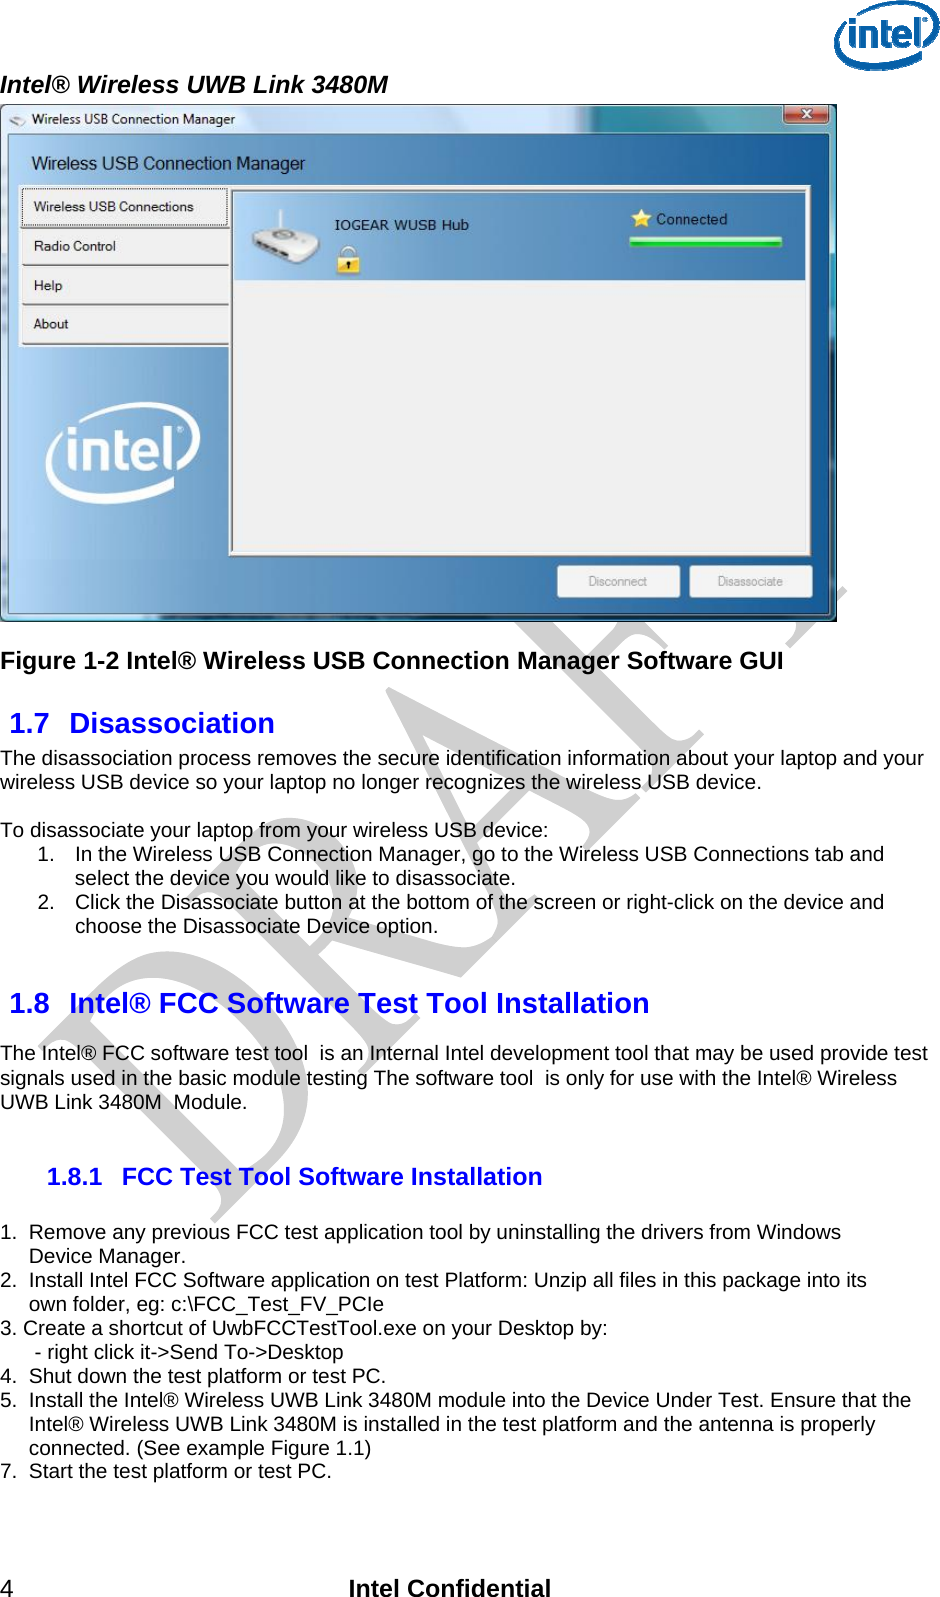  Intel® Wireless UWB Link 3480M 4 Intel Confidential  Figure 1-2 Intel® Wireless USB Connection Manager Software GUI 1.7  Disassociation The disassociation process removes the secure identification information about your laptop and your wireless USB device so your laptop no longer recognizes the wireless USB device.  To disassociate your laptop from your wireless USB device: 1.  In the Wireless USB Connection Manager, go to the Wireless USB Connections tab and select the device you would like to disassociate.  2.  Click the Disassociate button at the bottom of the screen or right-click on the device and choose the Disassociate Device option.   1.8  Intel® FCC Software Test Tool Installation  The Intel® FCC software test tool  is an Internal Intel development tool that may be used provide test signals used in the basic module testing The software tool  is only for use with the Intel® Wireless UWB Link 3480M  Module.  1.8.1  FCC Test Tool Software Installation  1.  Remove any previous FCC test application tool by uninstalling the drivers from Windows       Device Manager.  2.  Install Intel FCC Software application on test Platform: Unzip all files in this package into its      own folder, eg: c:\FCC_Test_FV_PCIe 3. Create a shortcut of UwbFCCTestTool.exe on your Desktop by:        - right click it-&gt;Send To-&gt;Desktop 4.  Shut down the test platform or test PC. 5.  Install the Intel® Wireless UWB Link 3480M module into the Device Under Test. Ensure that the       Intel® Wireless UWB Link 3480M is installed in the test platform and the antenna is properly      connected. (See example Figure 1.1) 7.  Start the test platform or test PC.  